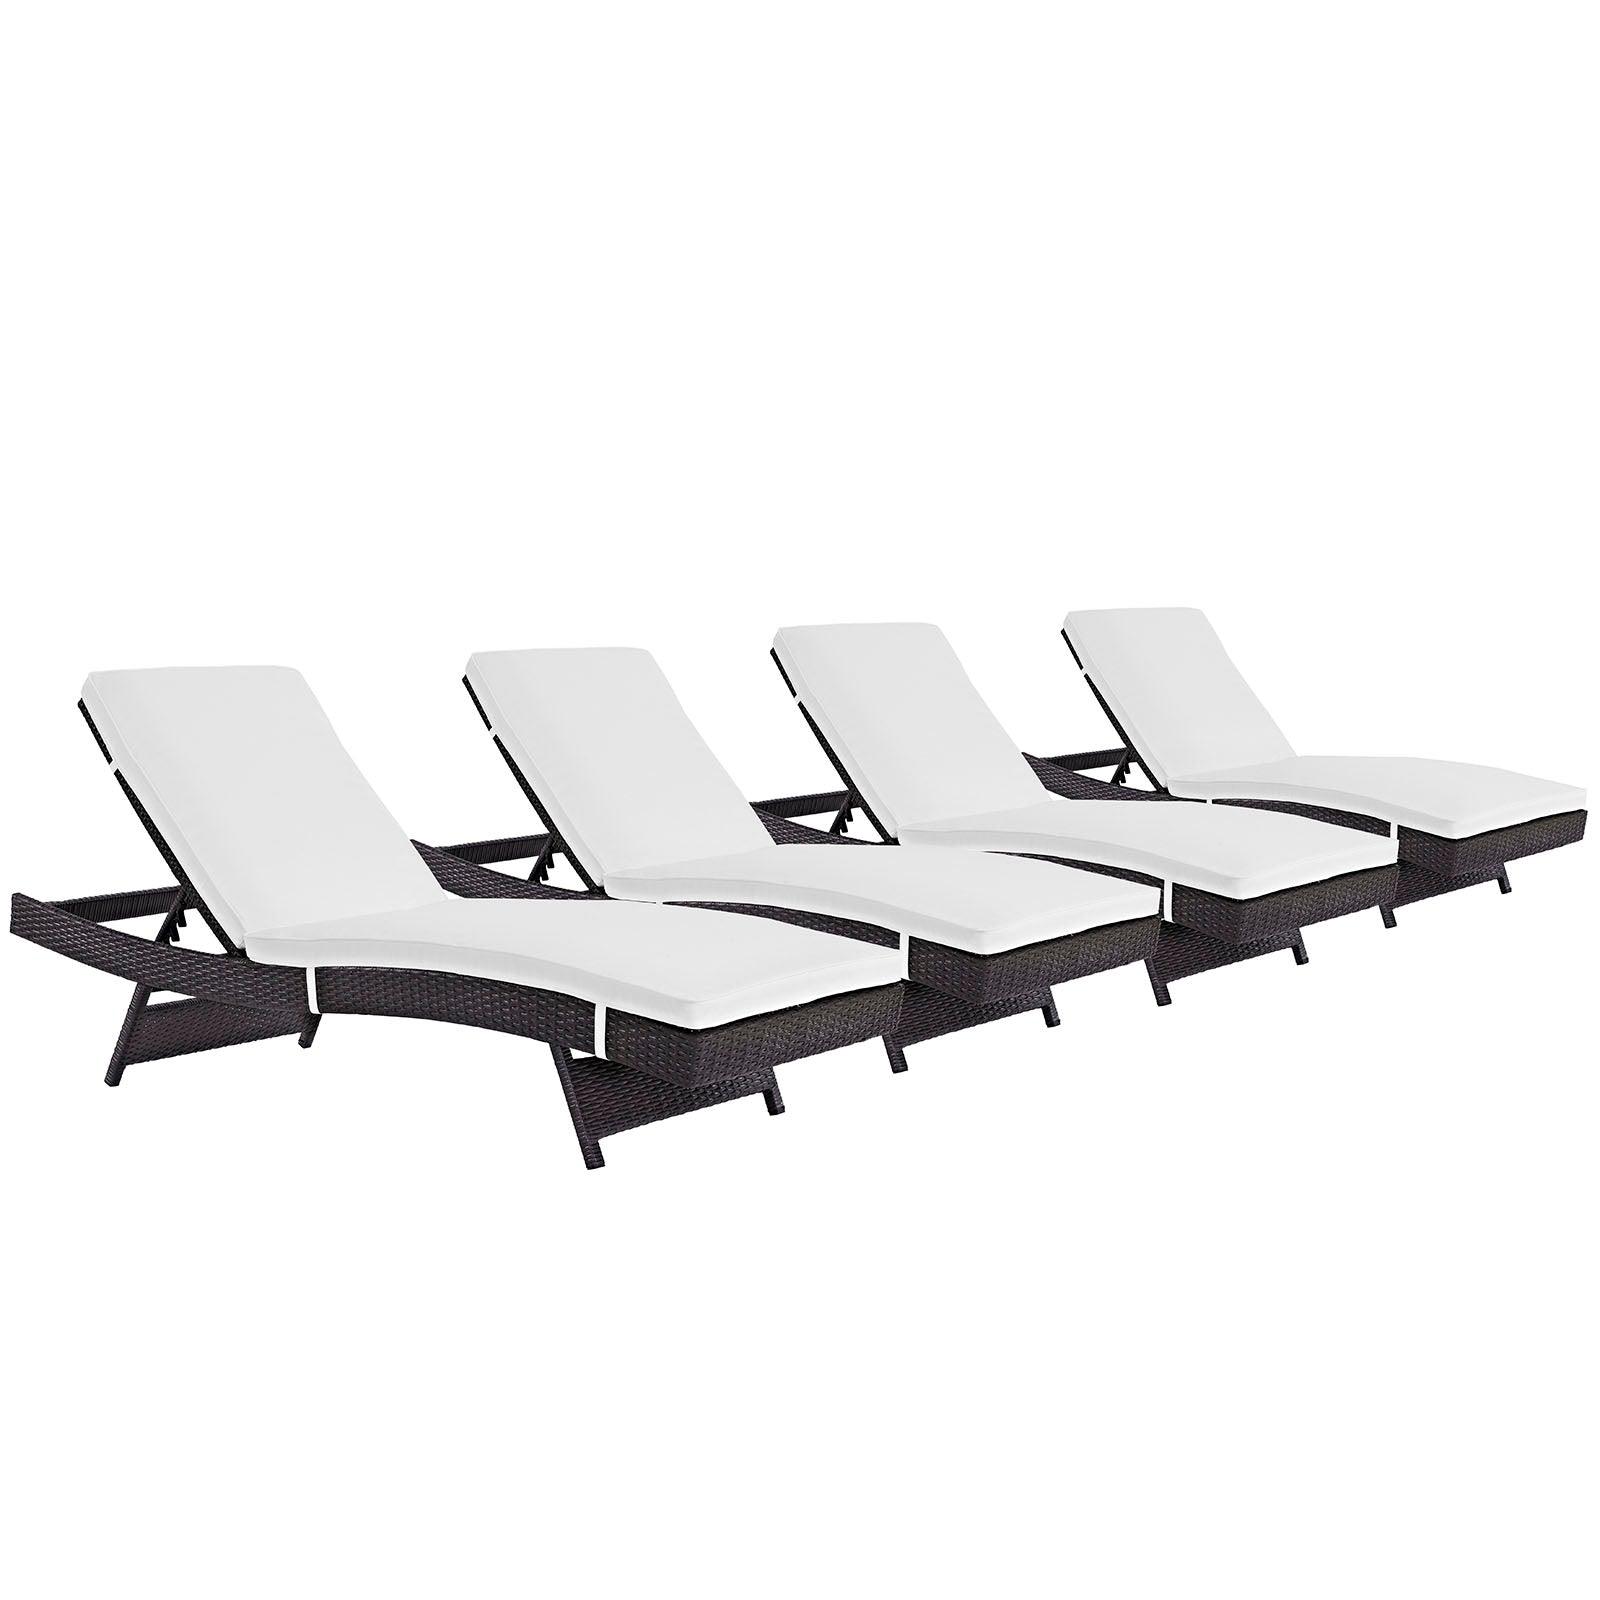 Modway Convene Chaise Outdoor Patio Set of 4 FredCo